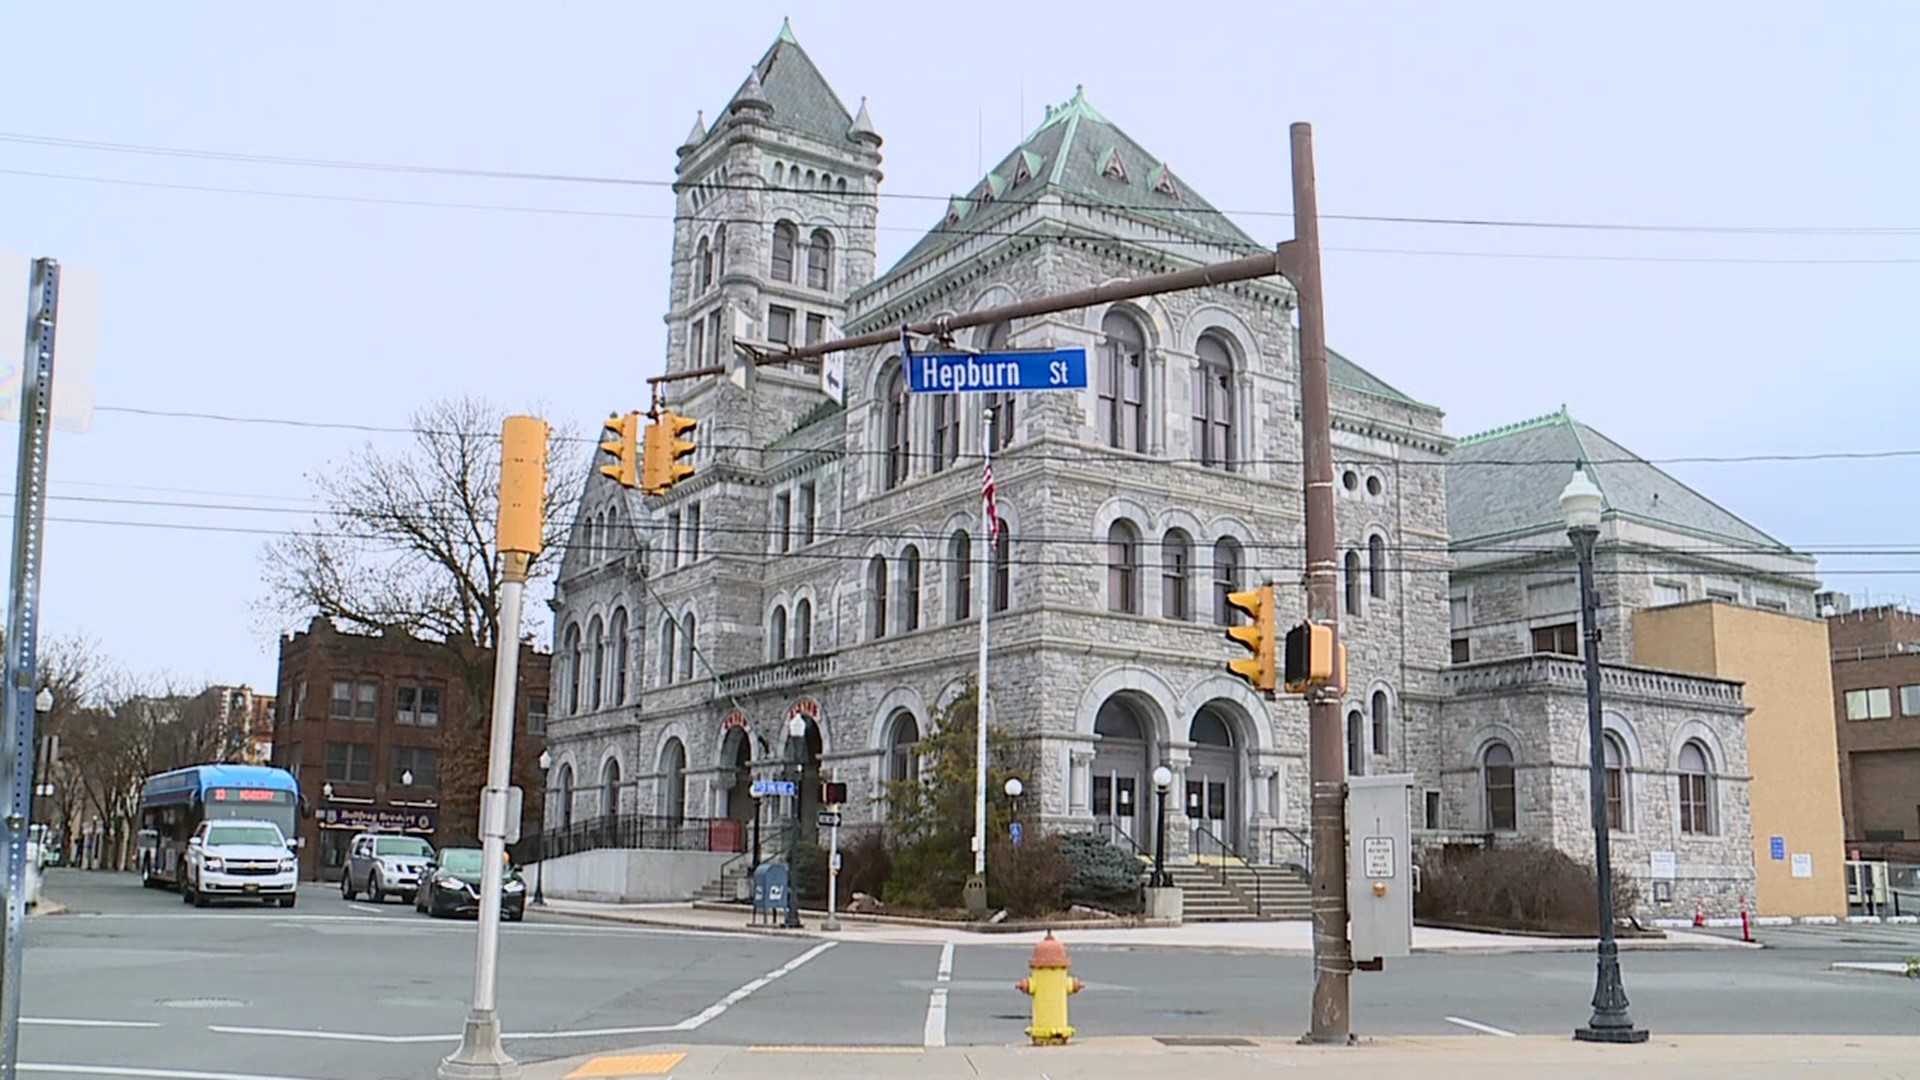 An ongoing Pennsylvania attorney general investigation and a condemned city hall are a few challenges the city will face this year.